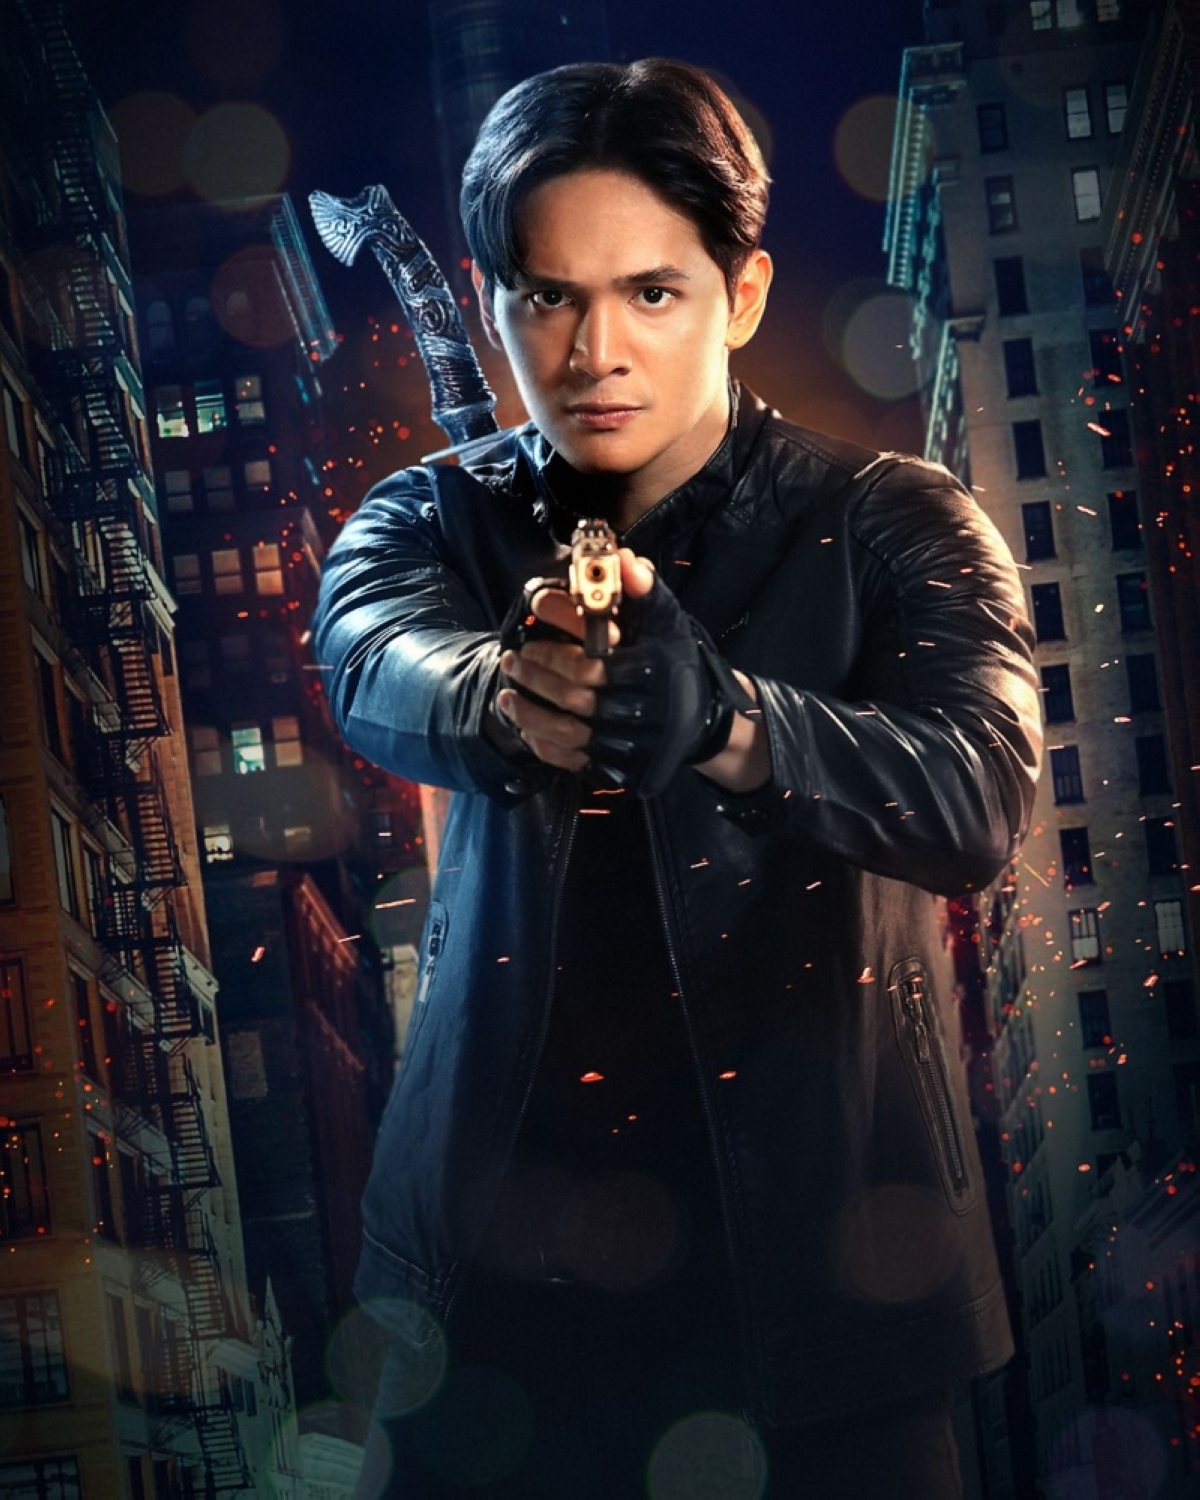 Ruru Madrid gives his all to 'Black Rider'